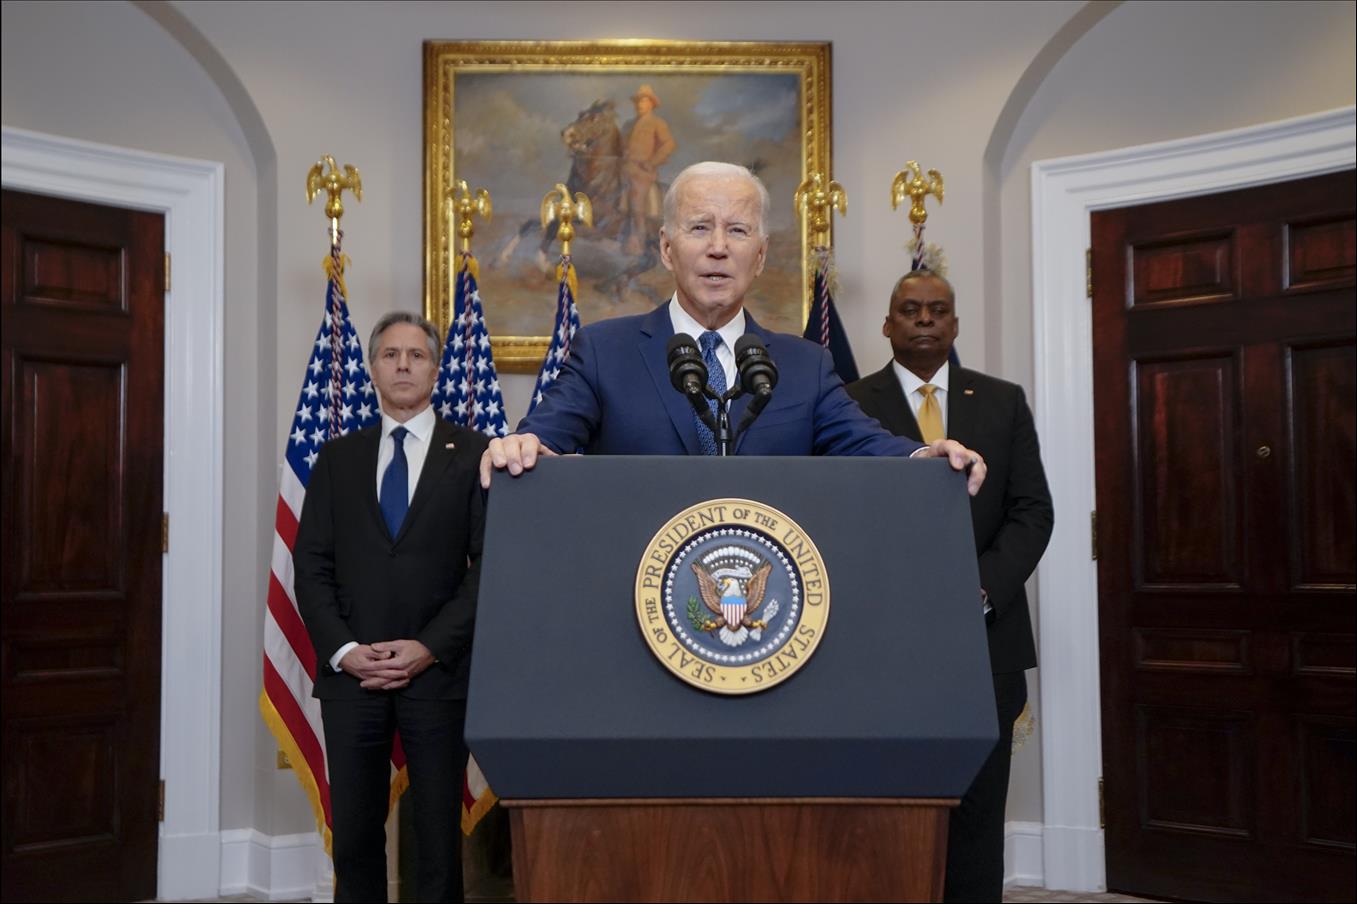 Biden And Trump Are Both Accused Of Mishandling Classified Documents  But There Are Key Differences